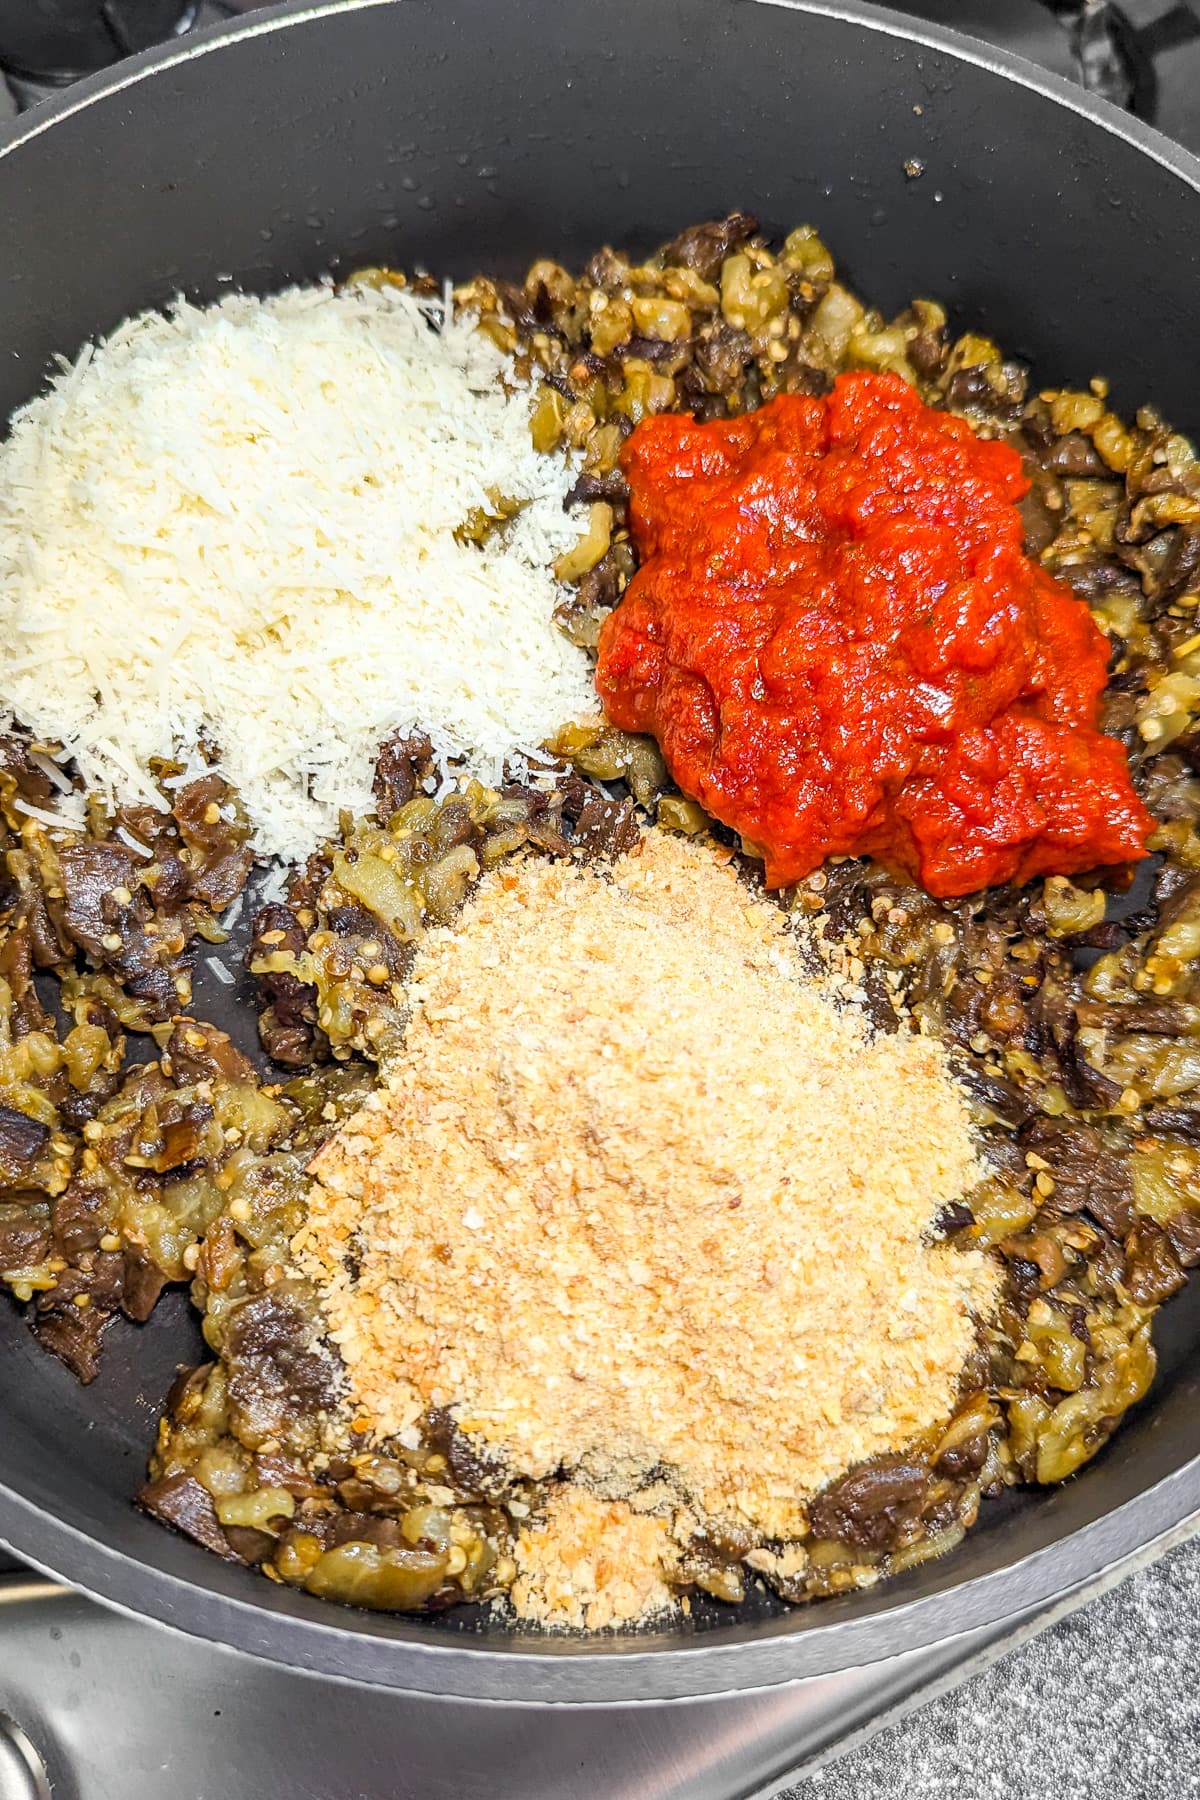 A pan on the stove with a mixture of eggplants, breadcrumbs and tomato sauce.